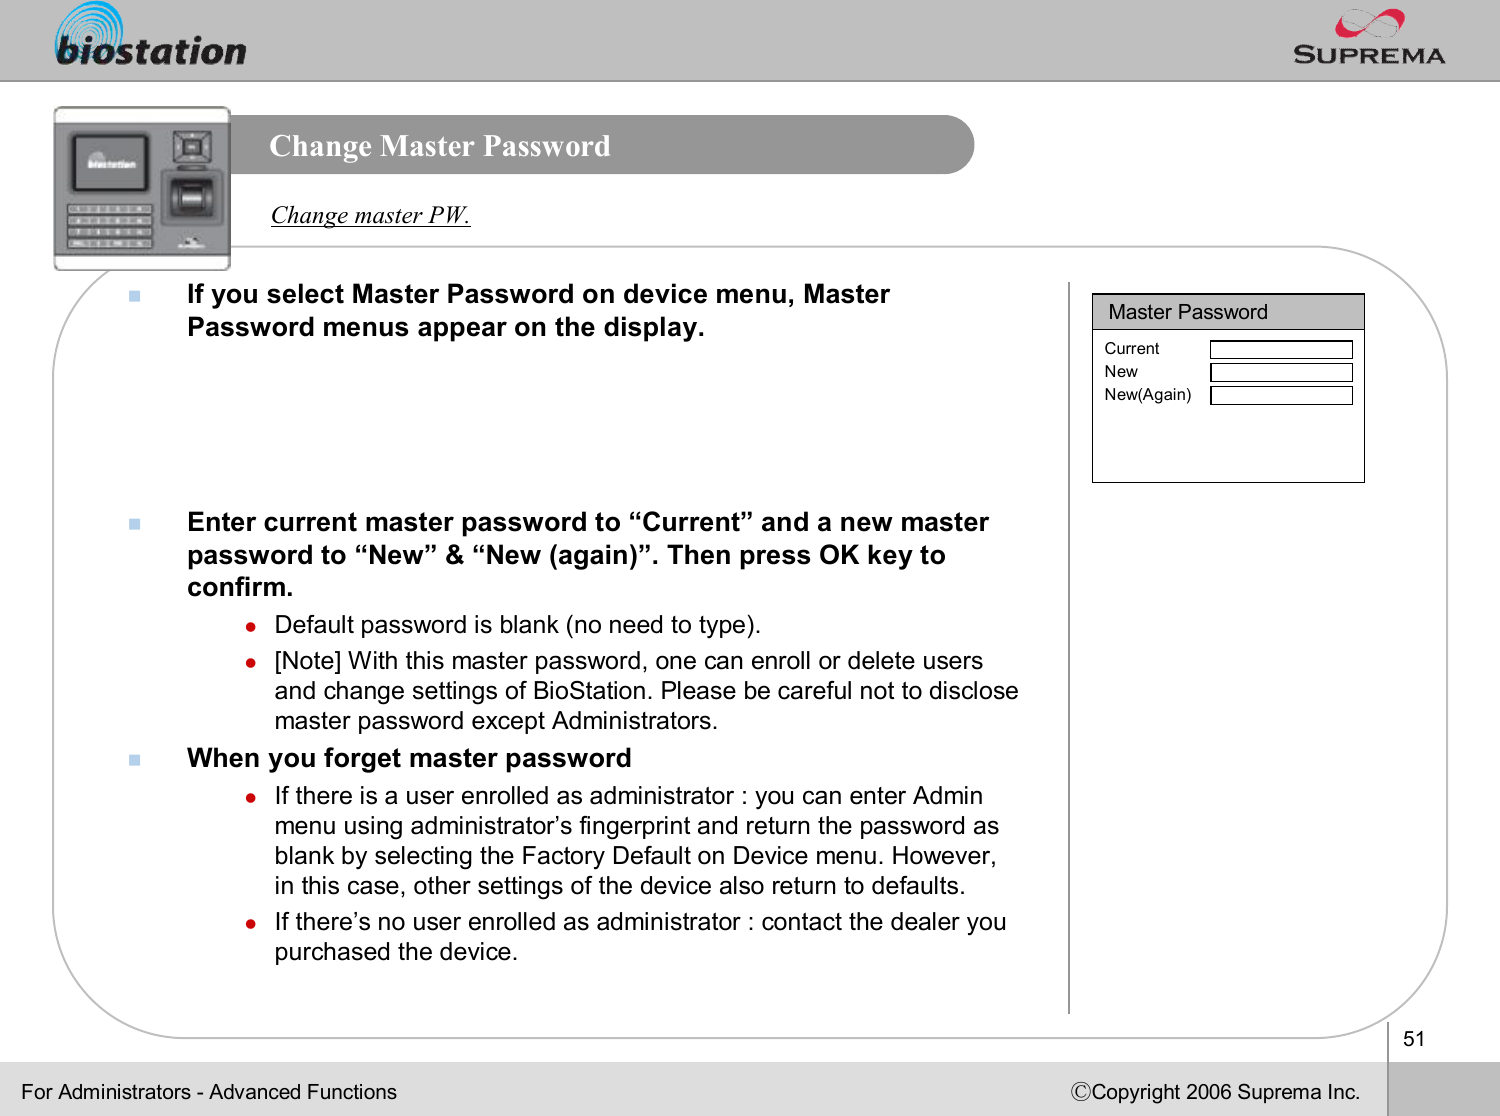 51ⒸCopyright 2006 Suprema Inc.Change Master PasswordnIf you select Master Password on device menu, Master Password menus appear on the display. nEnter current master password to “Current”and a new master password to “New”&amp; “New (again)”. Then press OK key to confirm. lDefault password is blank (no need to type).  l[Note] With this master password, one can enroll or delete usersand change settings of BioStation. Please be careful not to disclose master password except Administrators. nWhen you forget master passwordlIf there is a user enrolled as administrator : you can enter Admin menu using administrator’s fingerprint and return the password as blank by selecting the Factory Default on Device menu. However, in this case, other settings of the device also return to defaults.lIf there’s no user enrolled as administrator : contact the dealer you purchased the device.Master PasswordCurrentNewNew(Again)Change master PW.For Administrators -Advanced Functions